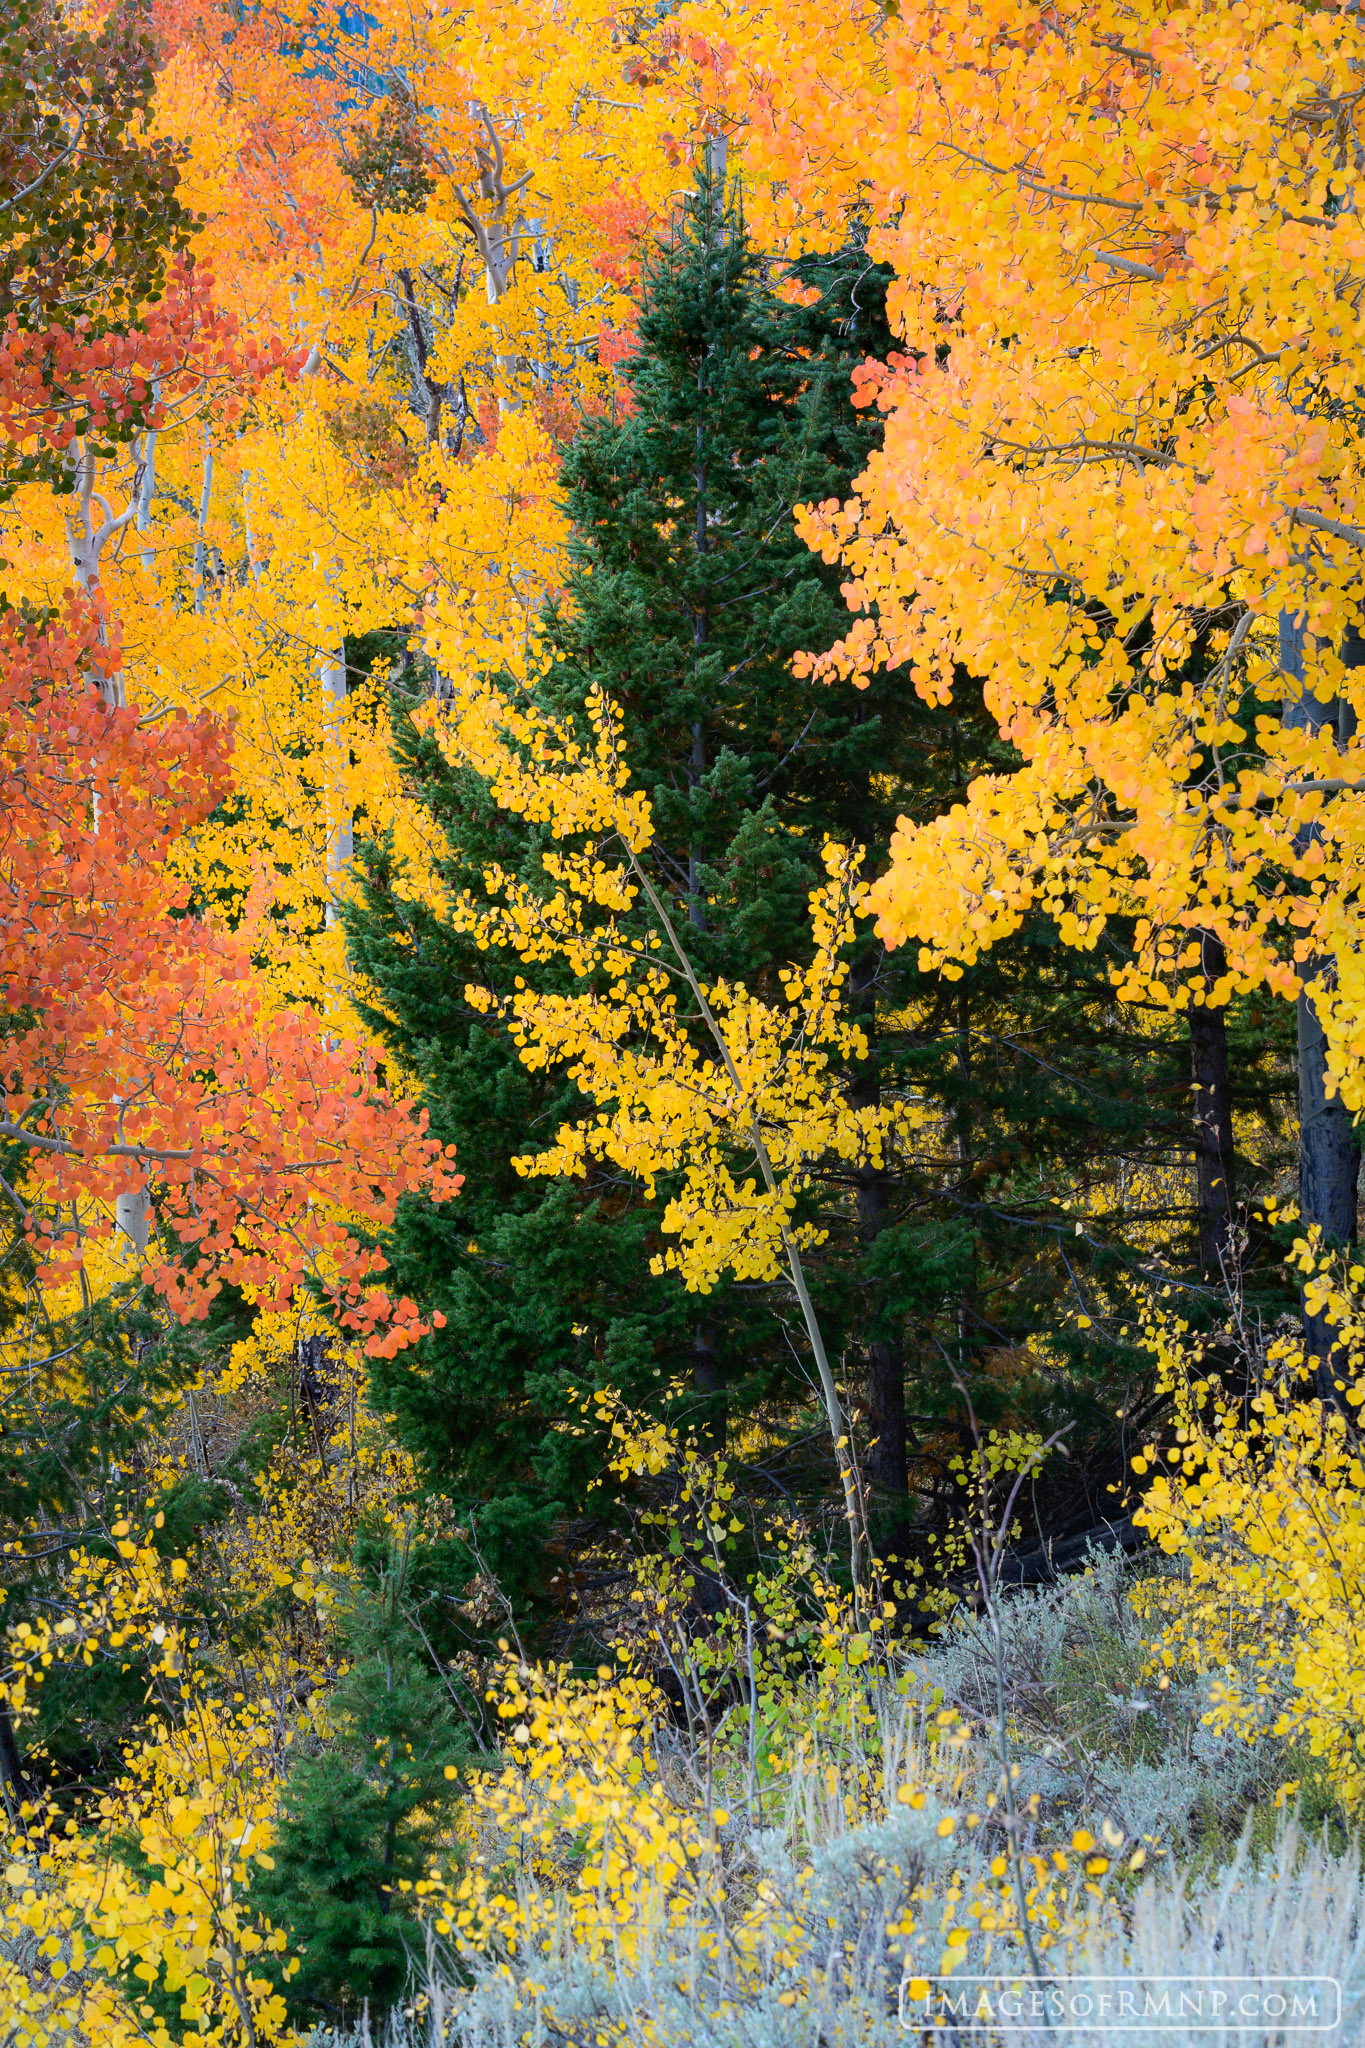 A pine tree finds itself in the embrace of an aspen grove during the colorful autumn season. There is something about this diverse...